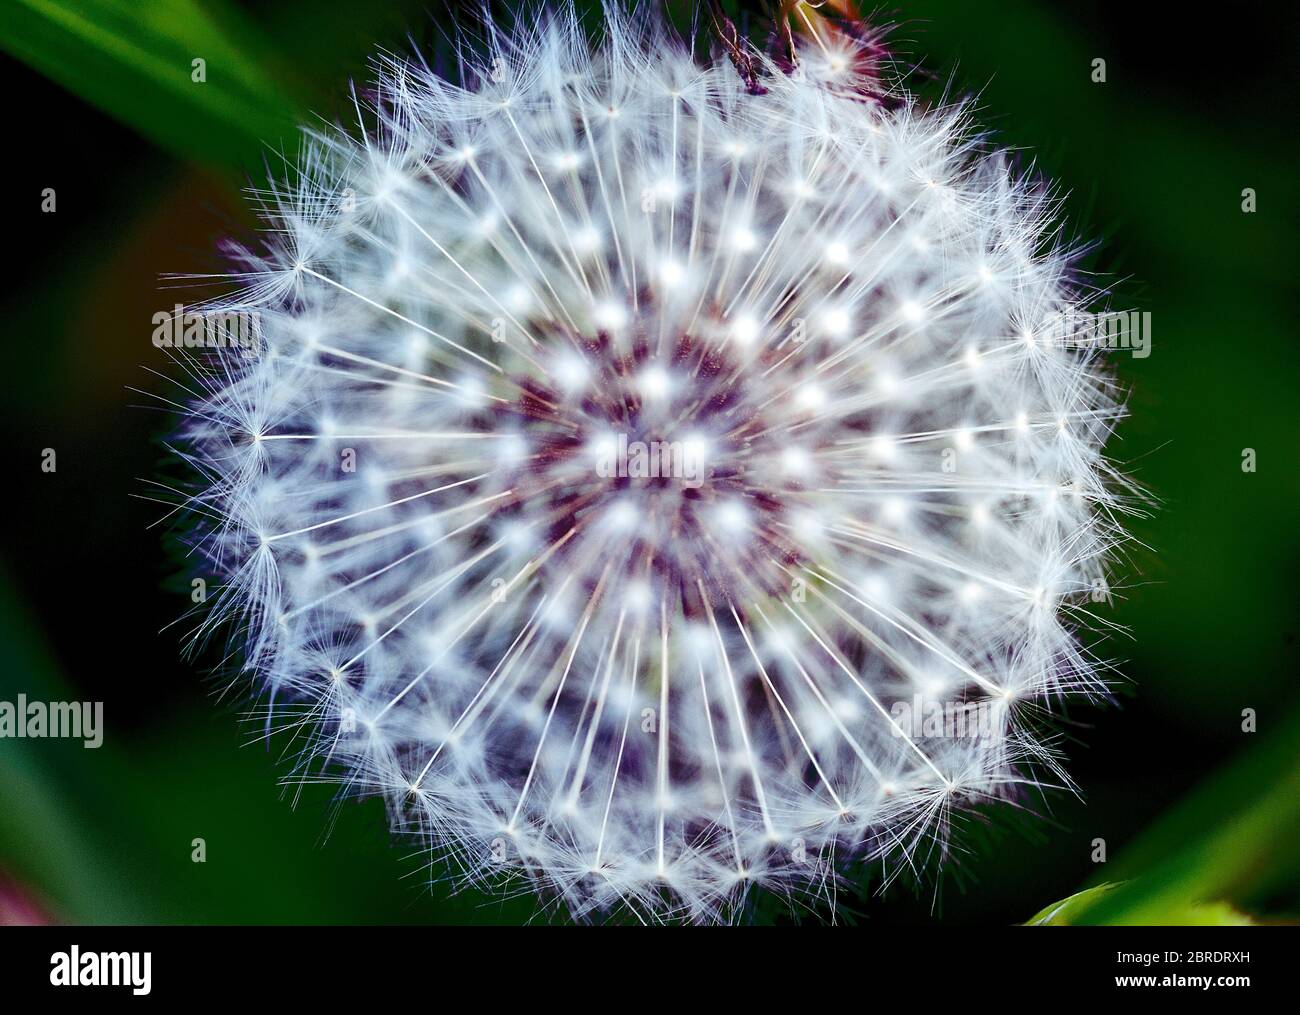 Close up macro image of dandelion seed head with incredible natural patterns. Stock Photo